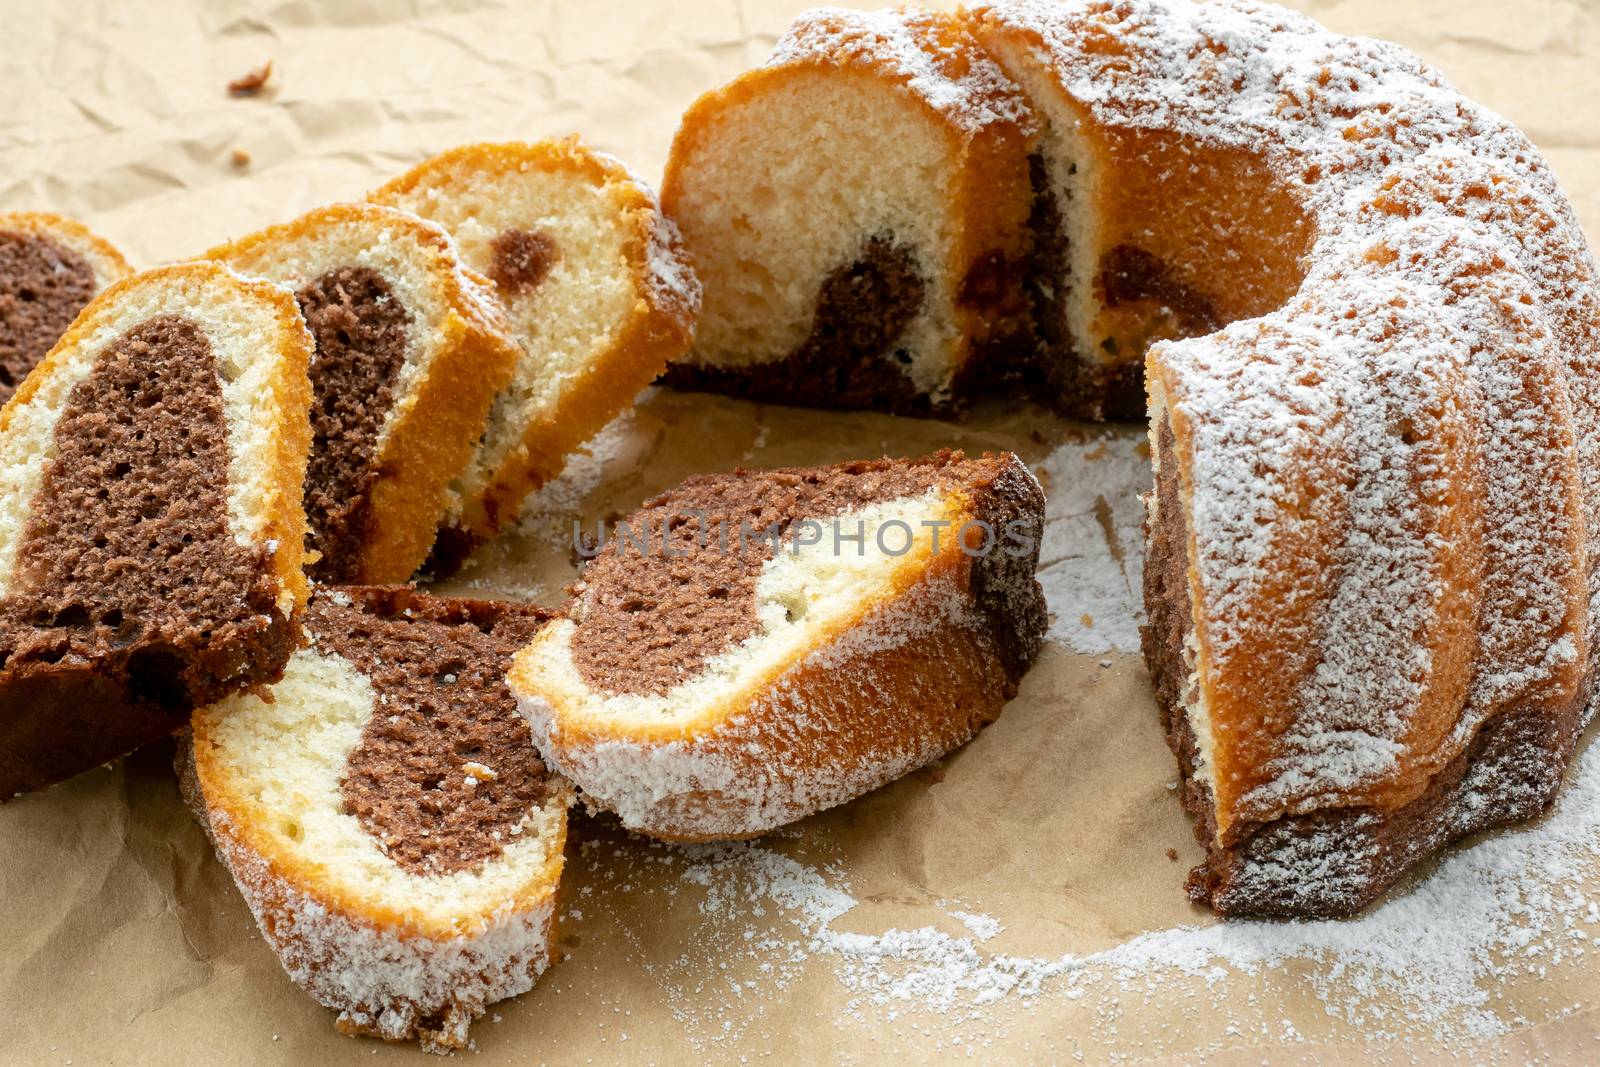 Traditional homemade marble cake. Sliced marble bundt cake on pa by xtrekx